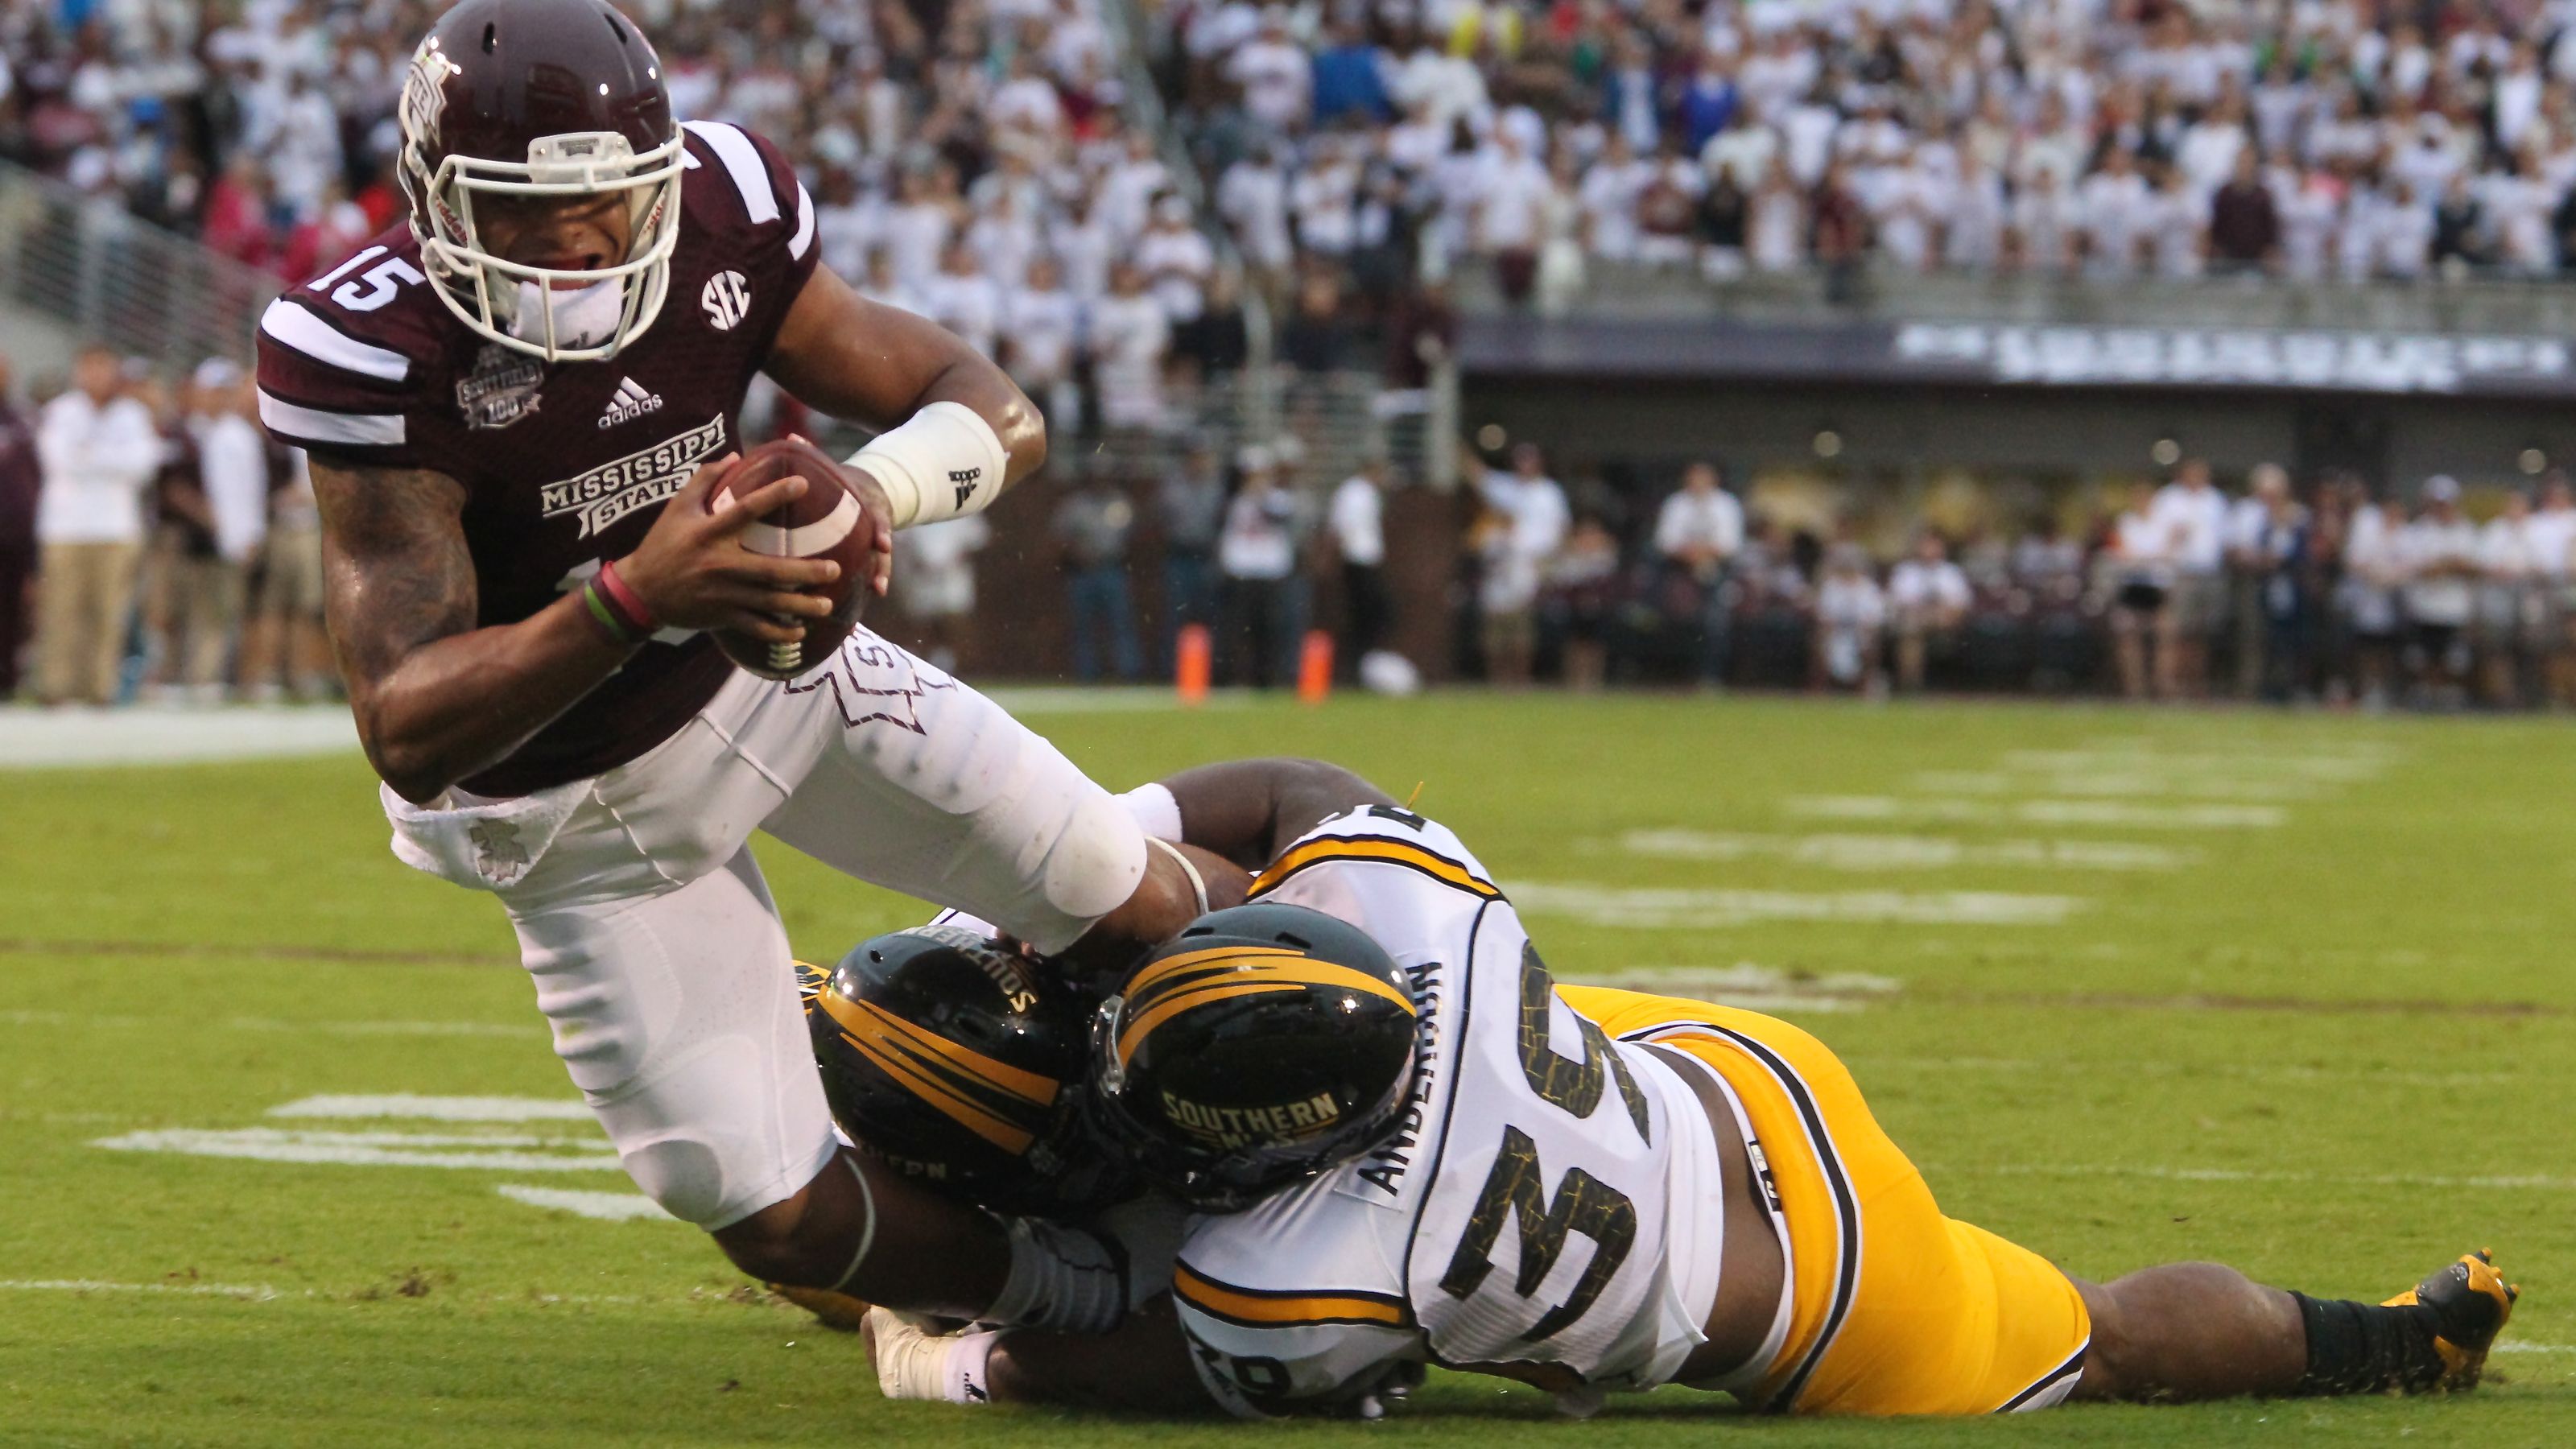 Mississippi State Blows Out Southern Miss